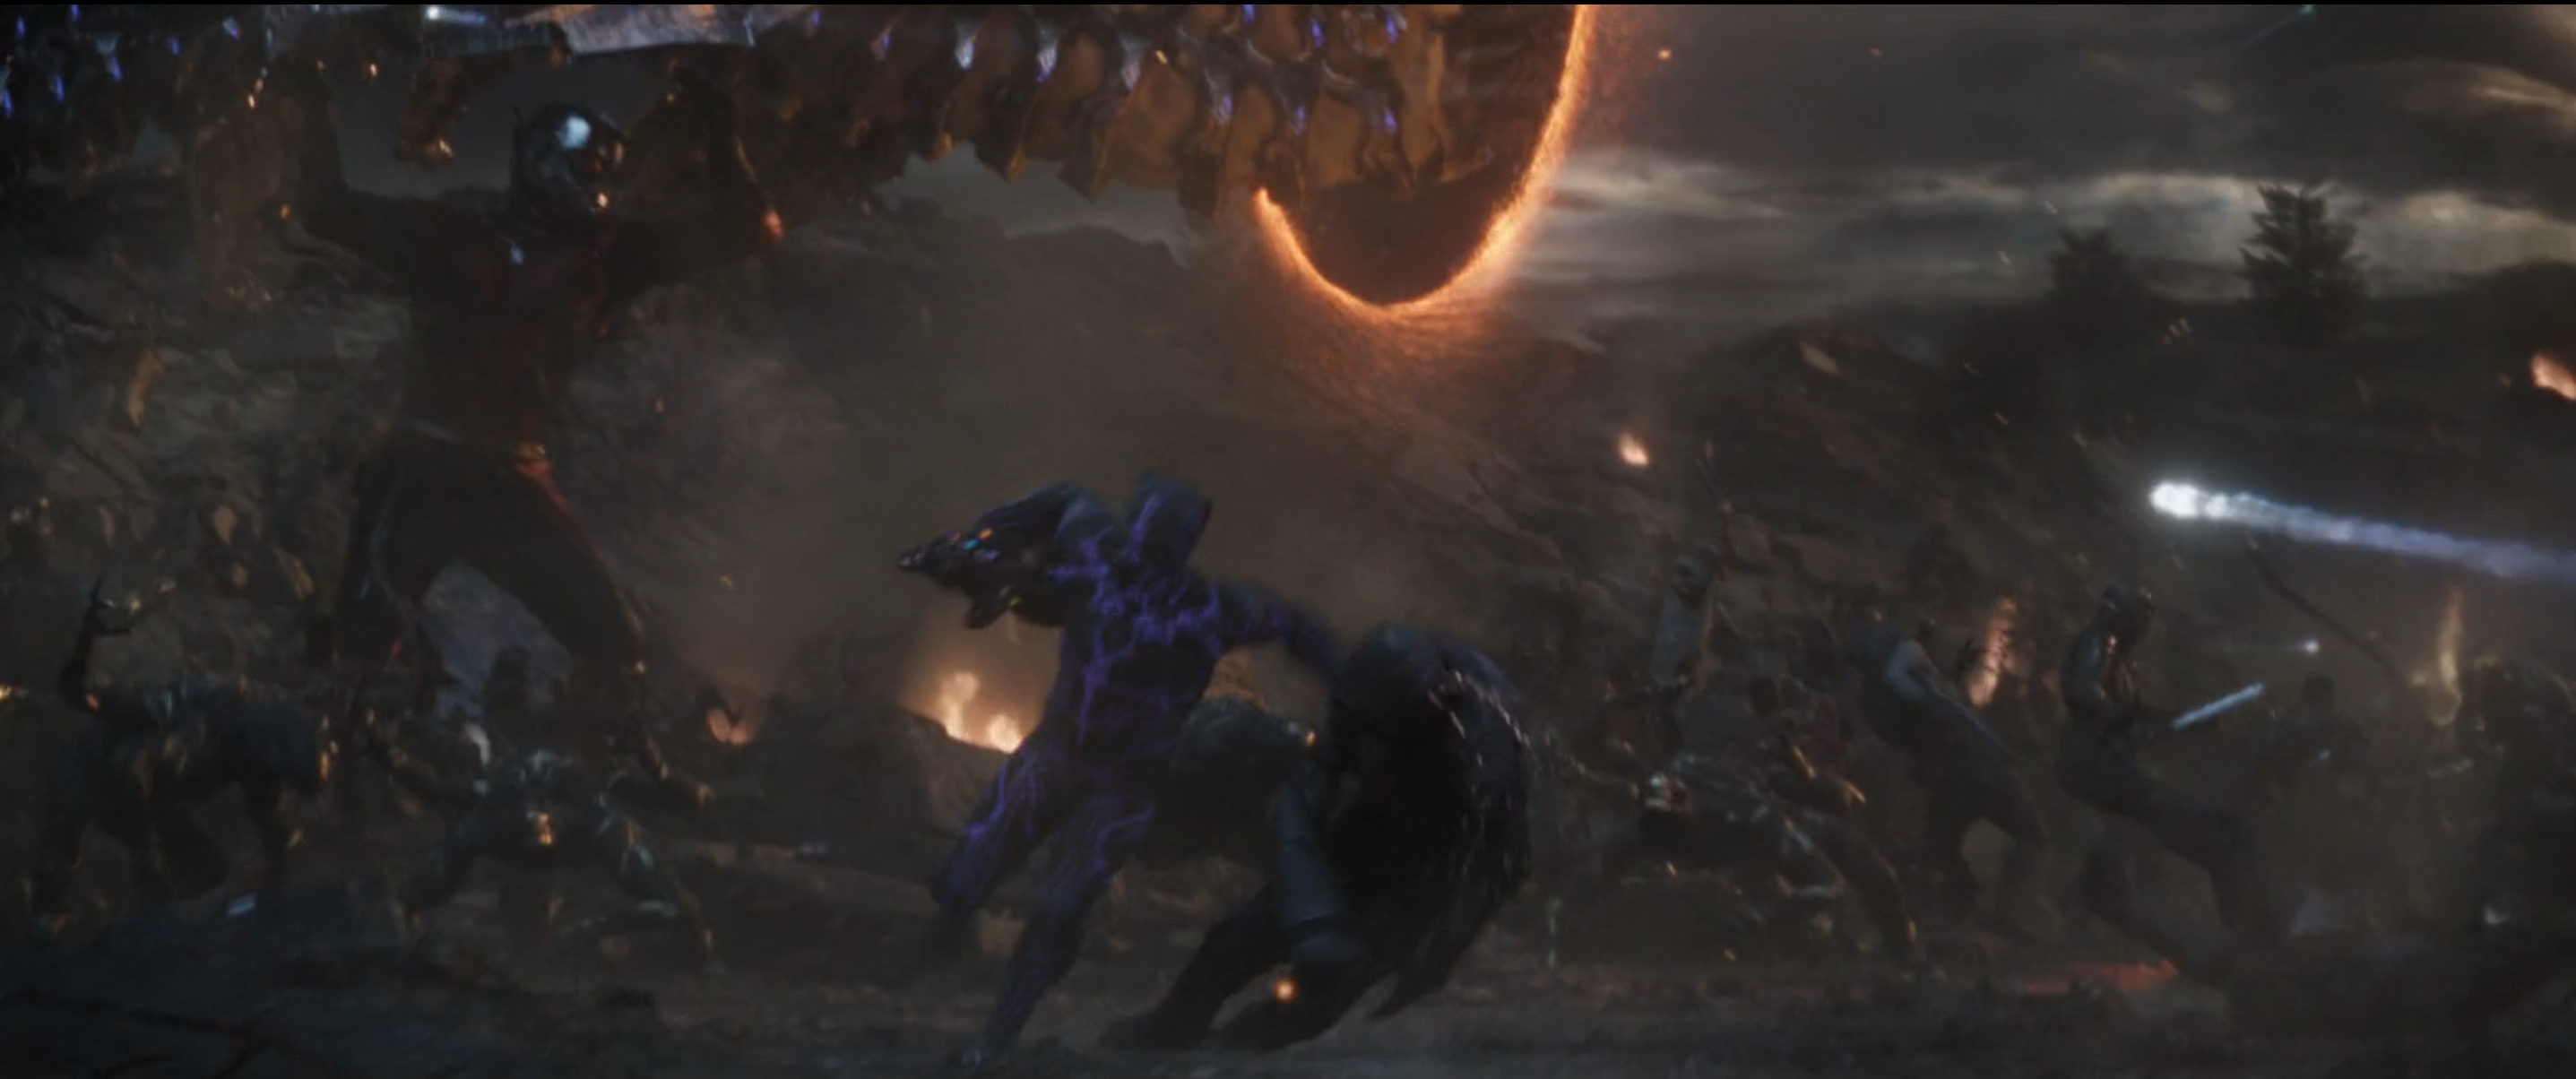 Umm Wtf Is Antman Doing With The Leviathan In Background